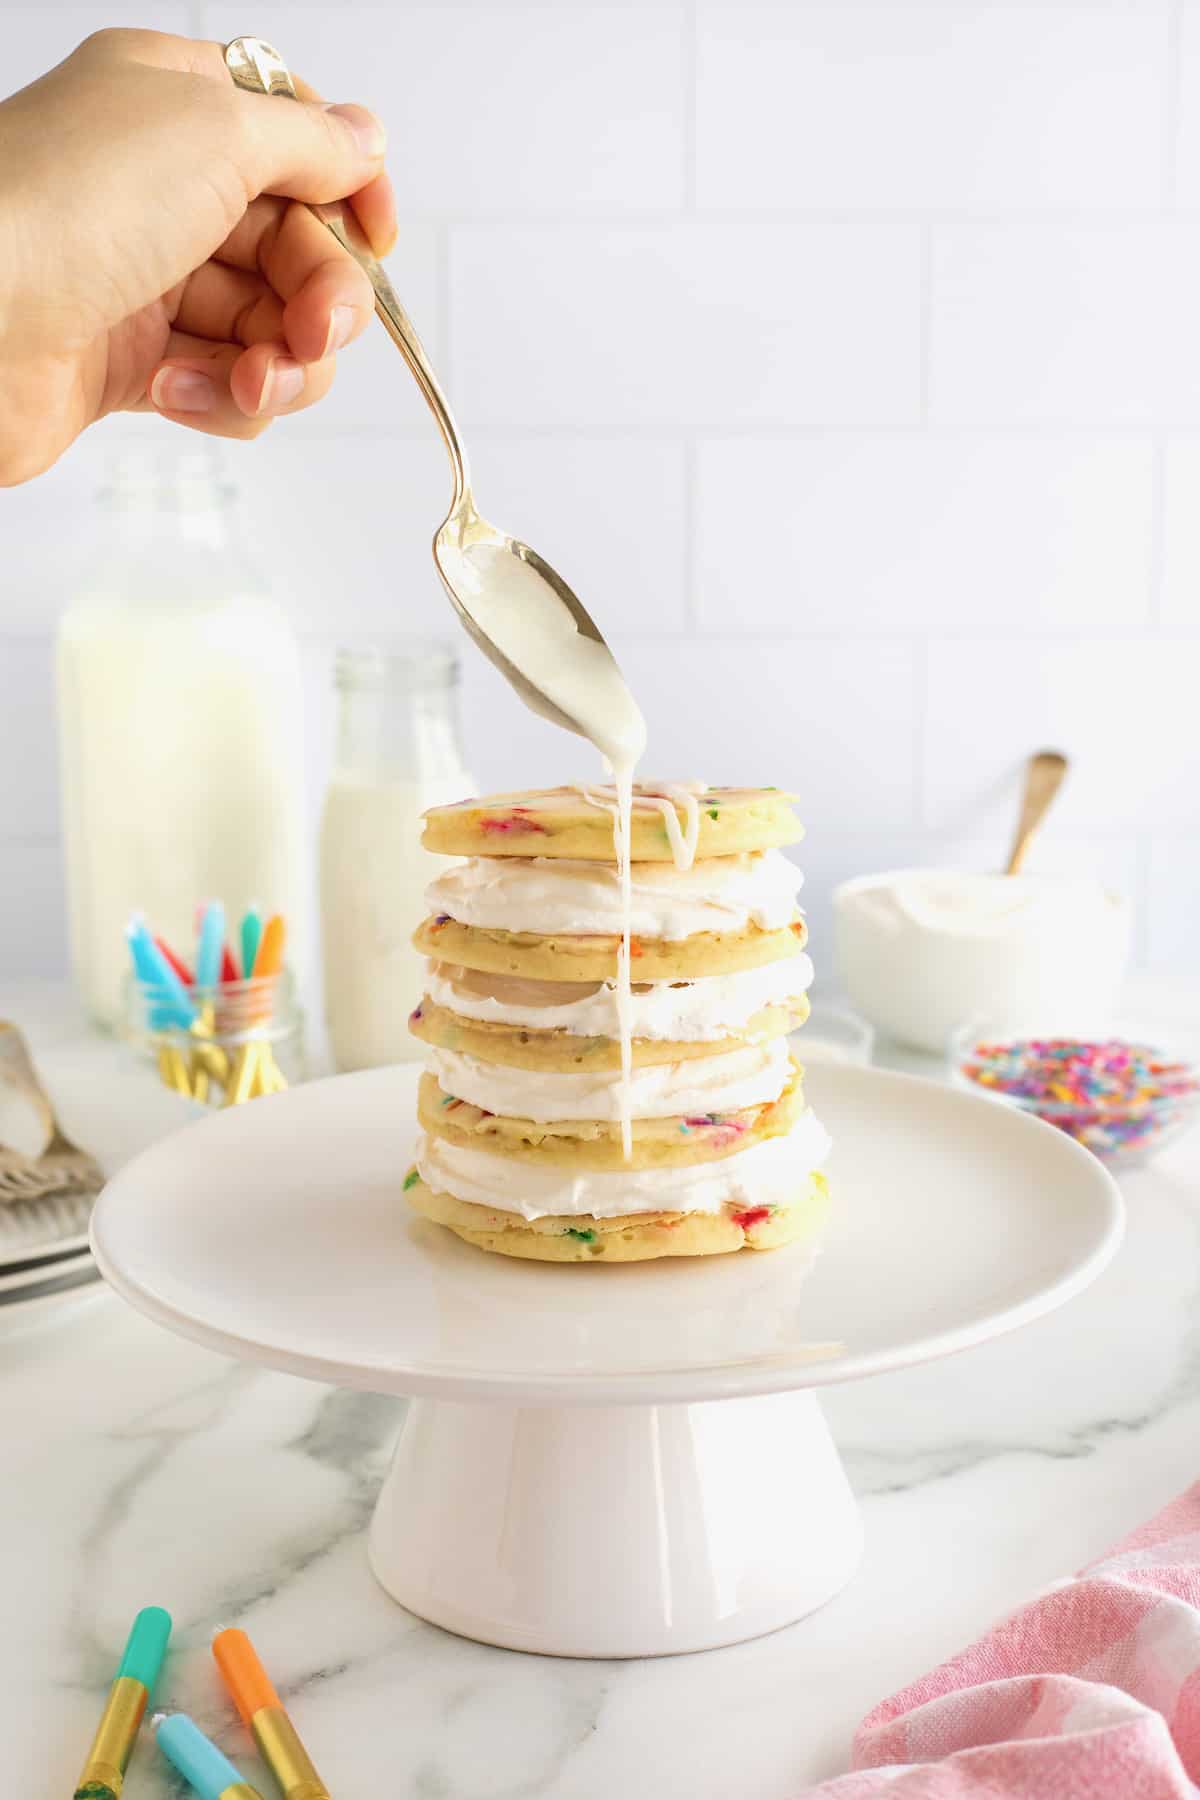 A layer cake made from confetti pancakes drizzled with simple icing.